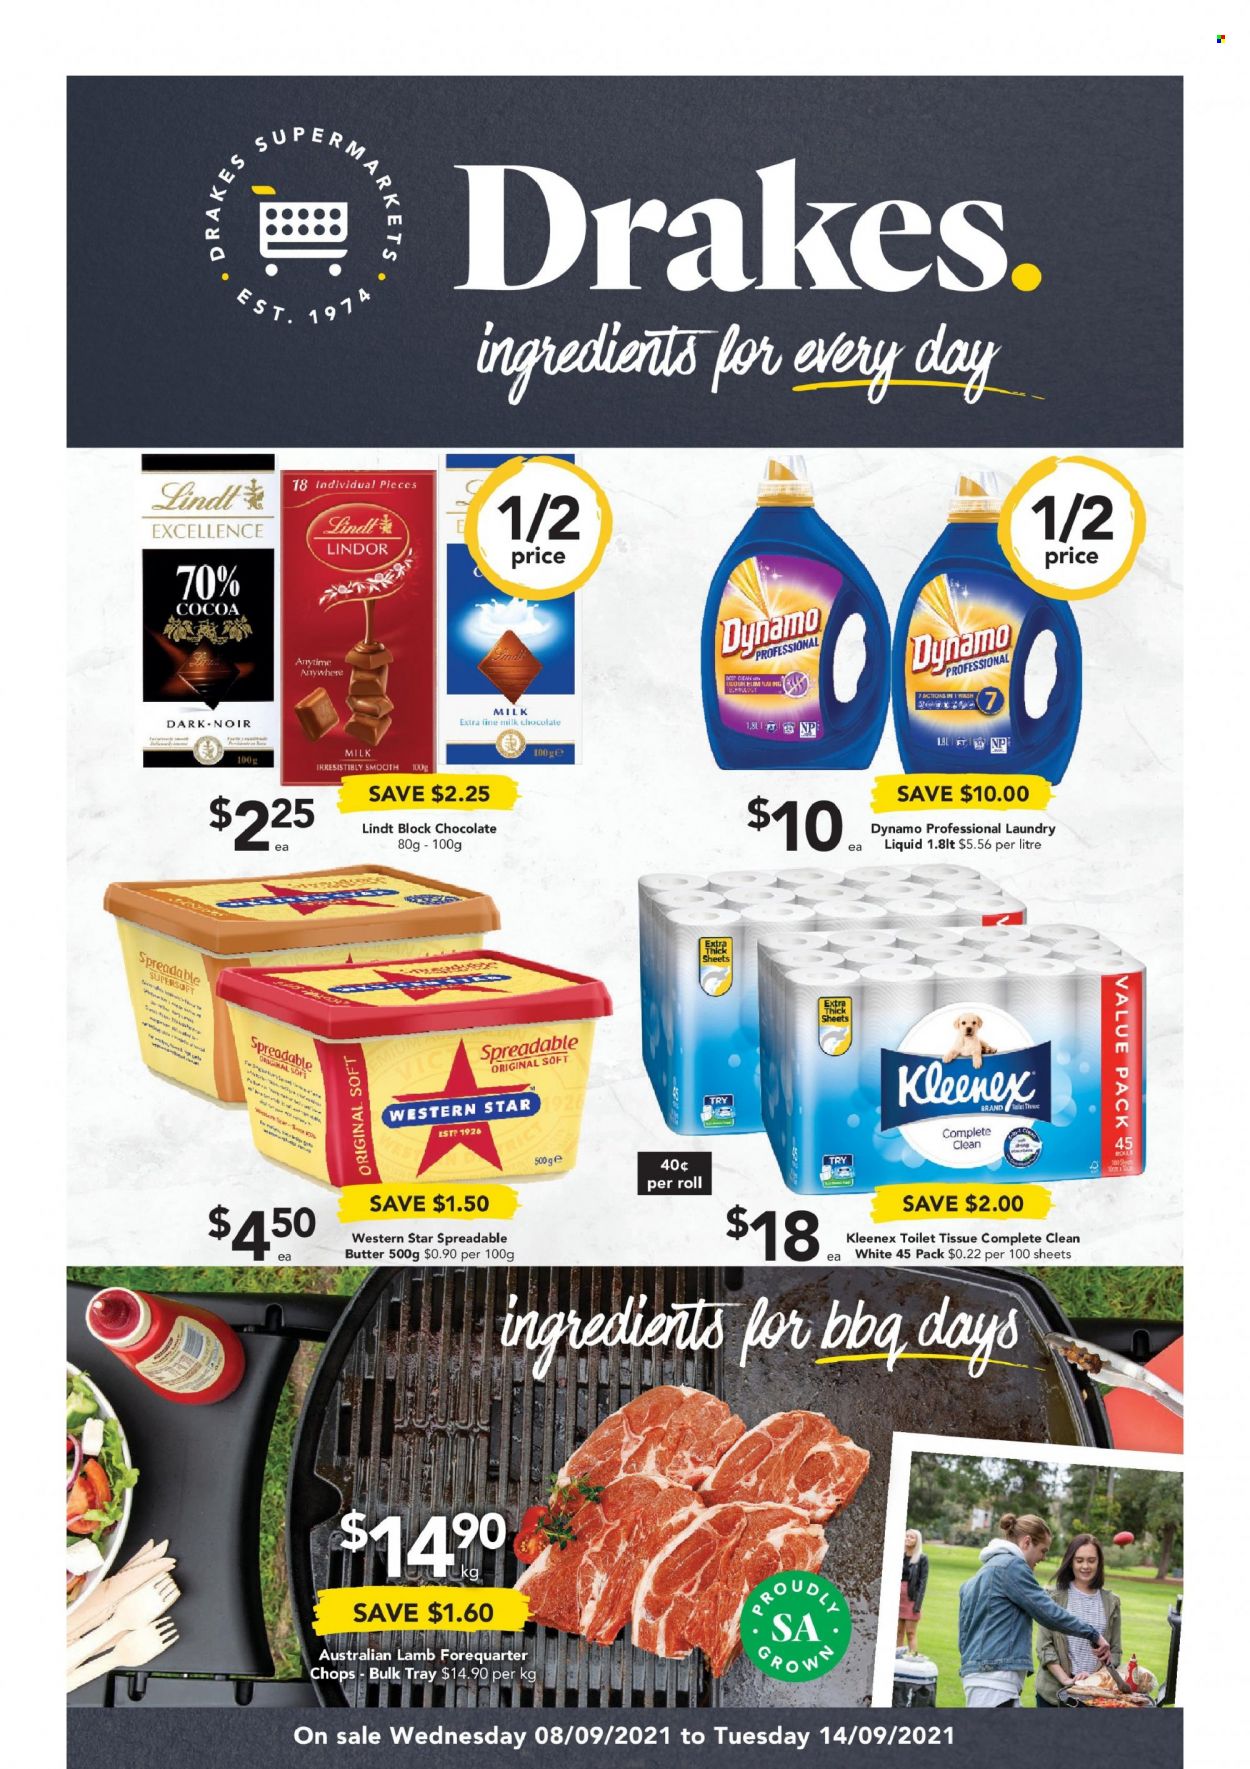 thumbnail - Drakes Catalogue - 8 Sep 2021 - 14 Sep 2021 - Sales products - Western Star Spreadable, Western Star, milk, butter, spreadable butter, chocolate, Lindt, Lindor, Kleenex, toilet paper, laundry detergent. Page 1.